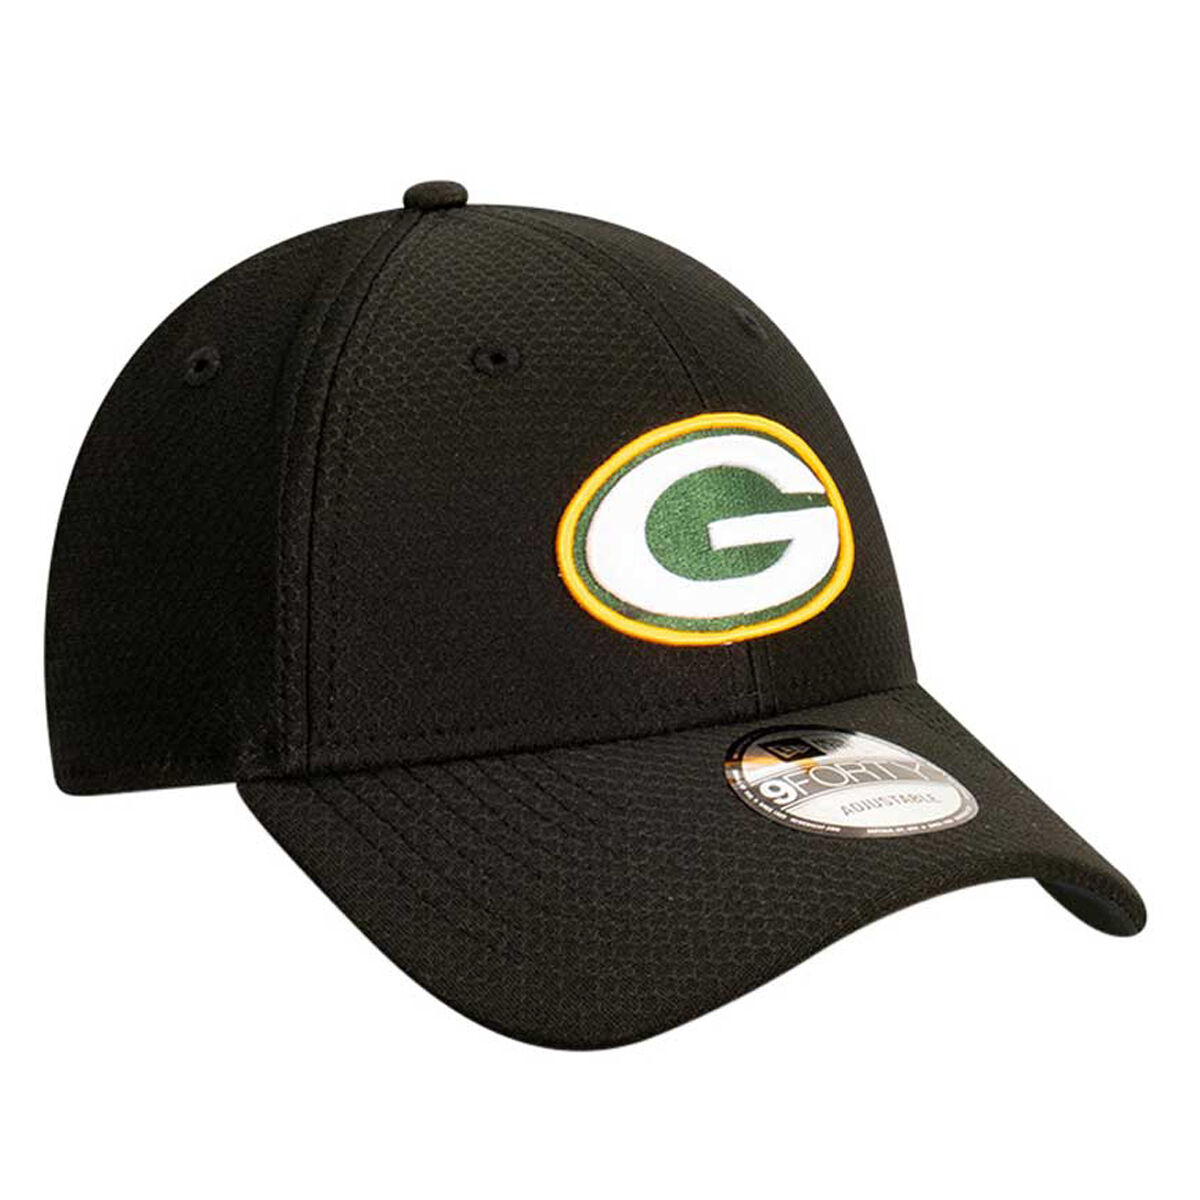 Green Bay Packers New Era 9FORTY Cap 